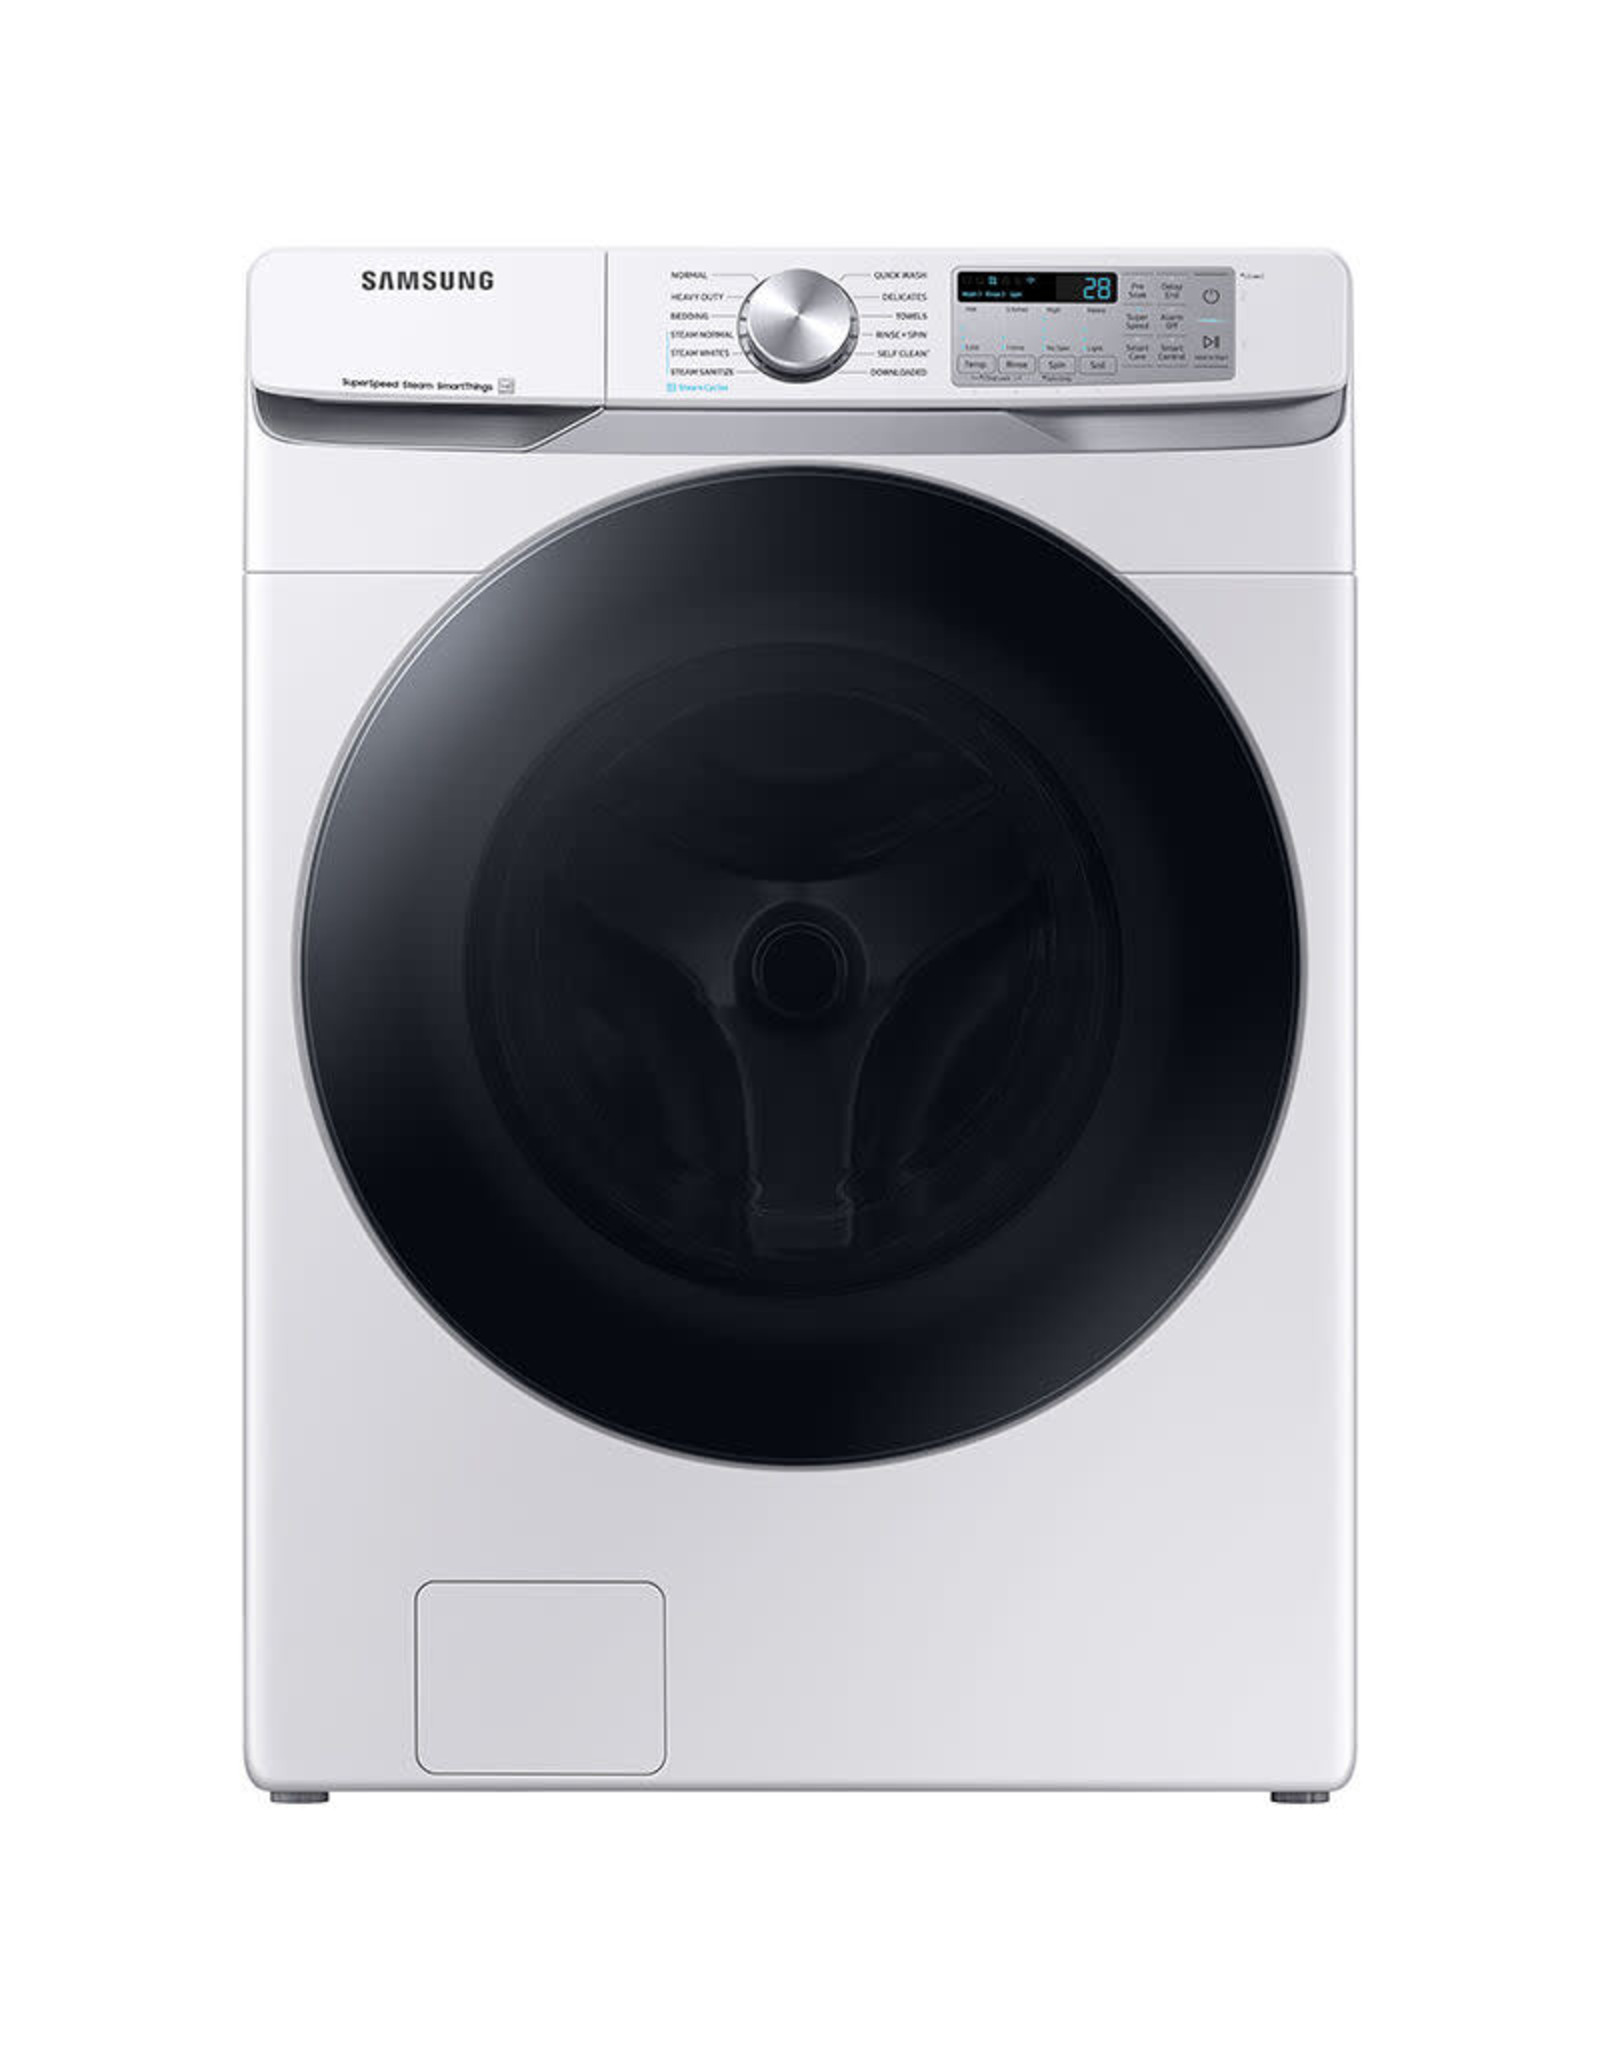 SAMSUNG WF45B6300AW  4.5 cu. ft. Large Capacity Smart Front Load Washer with Super Speed Wash in White